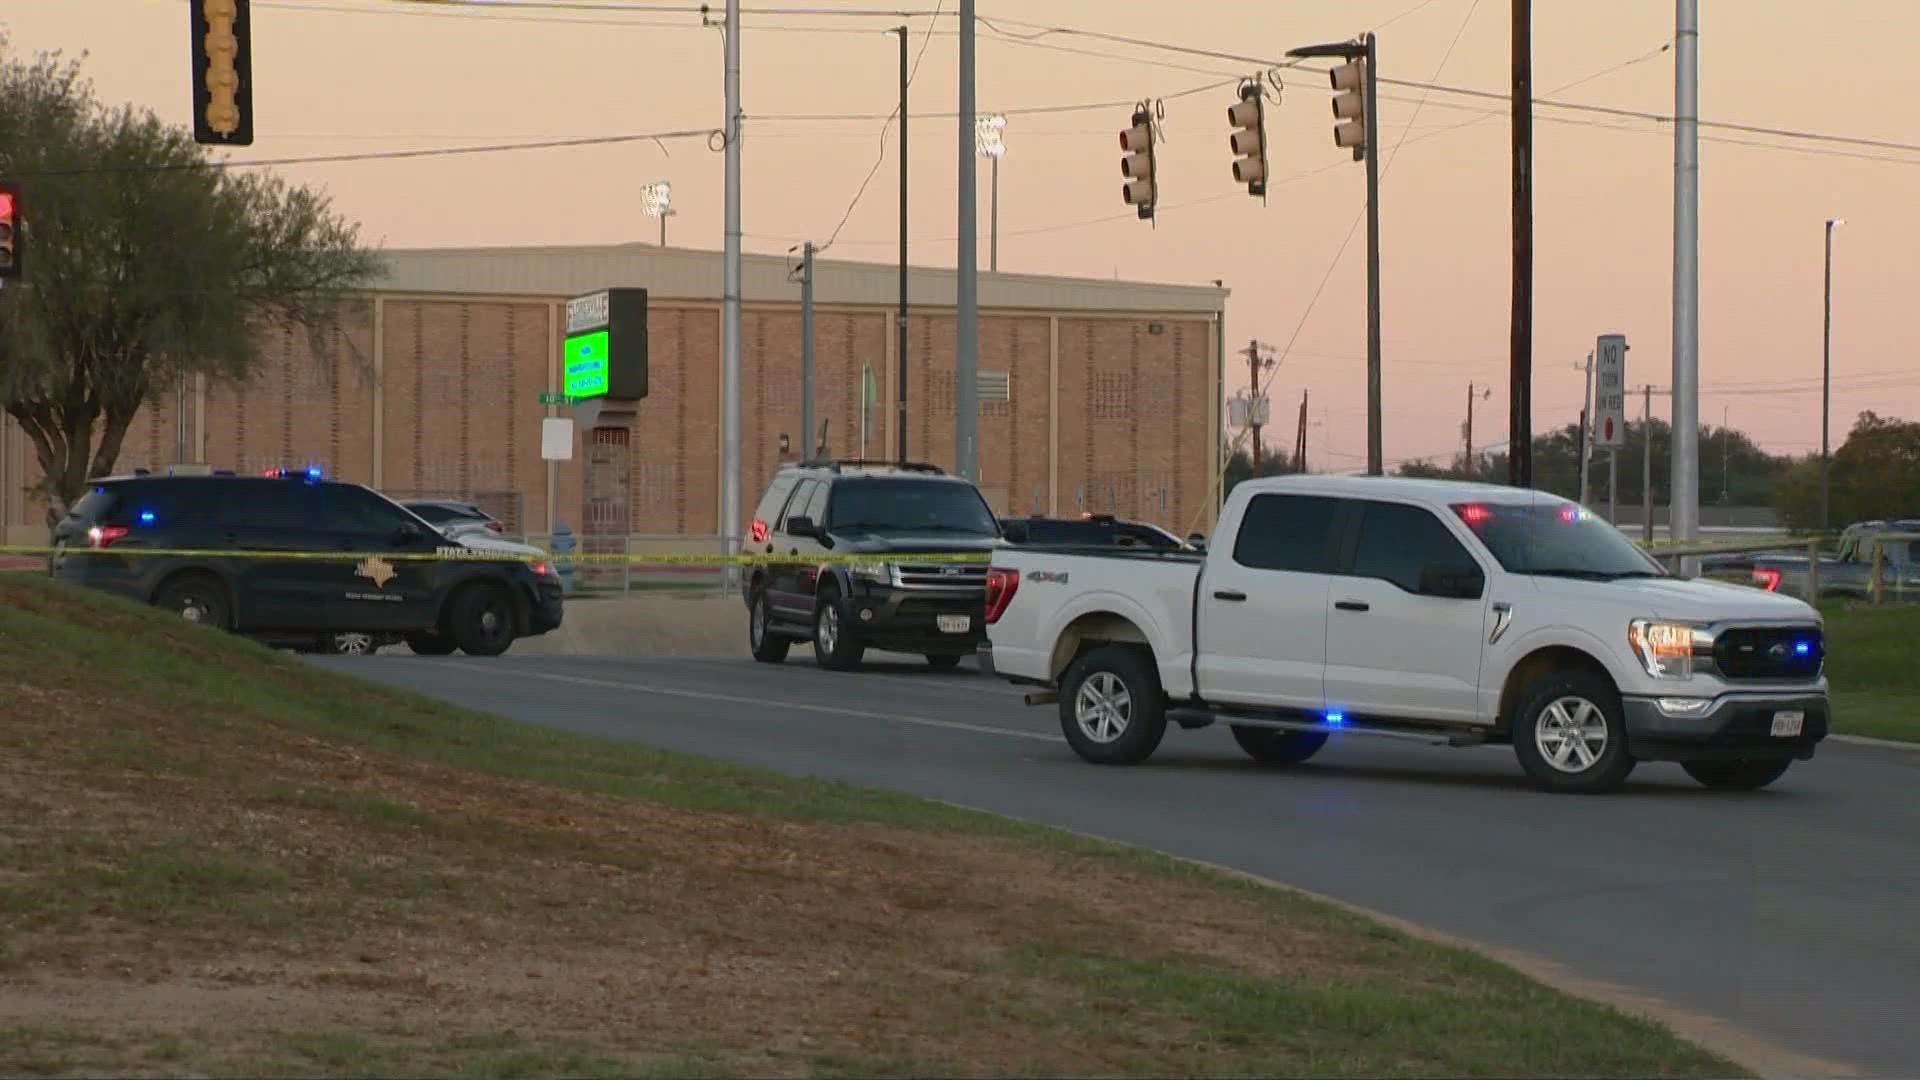 Dozens of officers responded to the shooting scene, but authorities say only the suspect was hit. Floresville High School was briefly on lockdown.